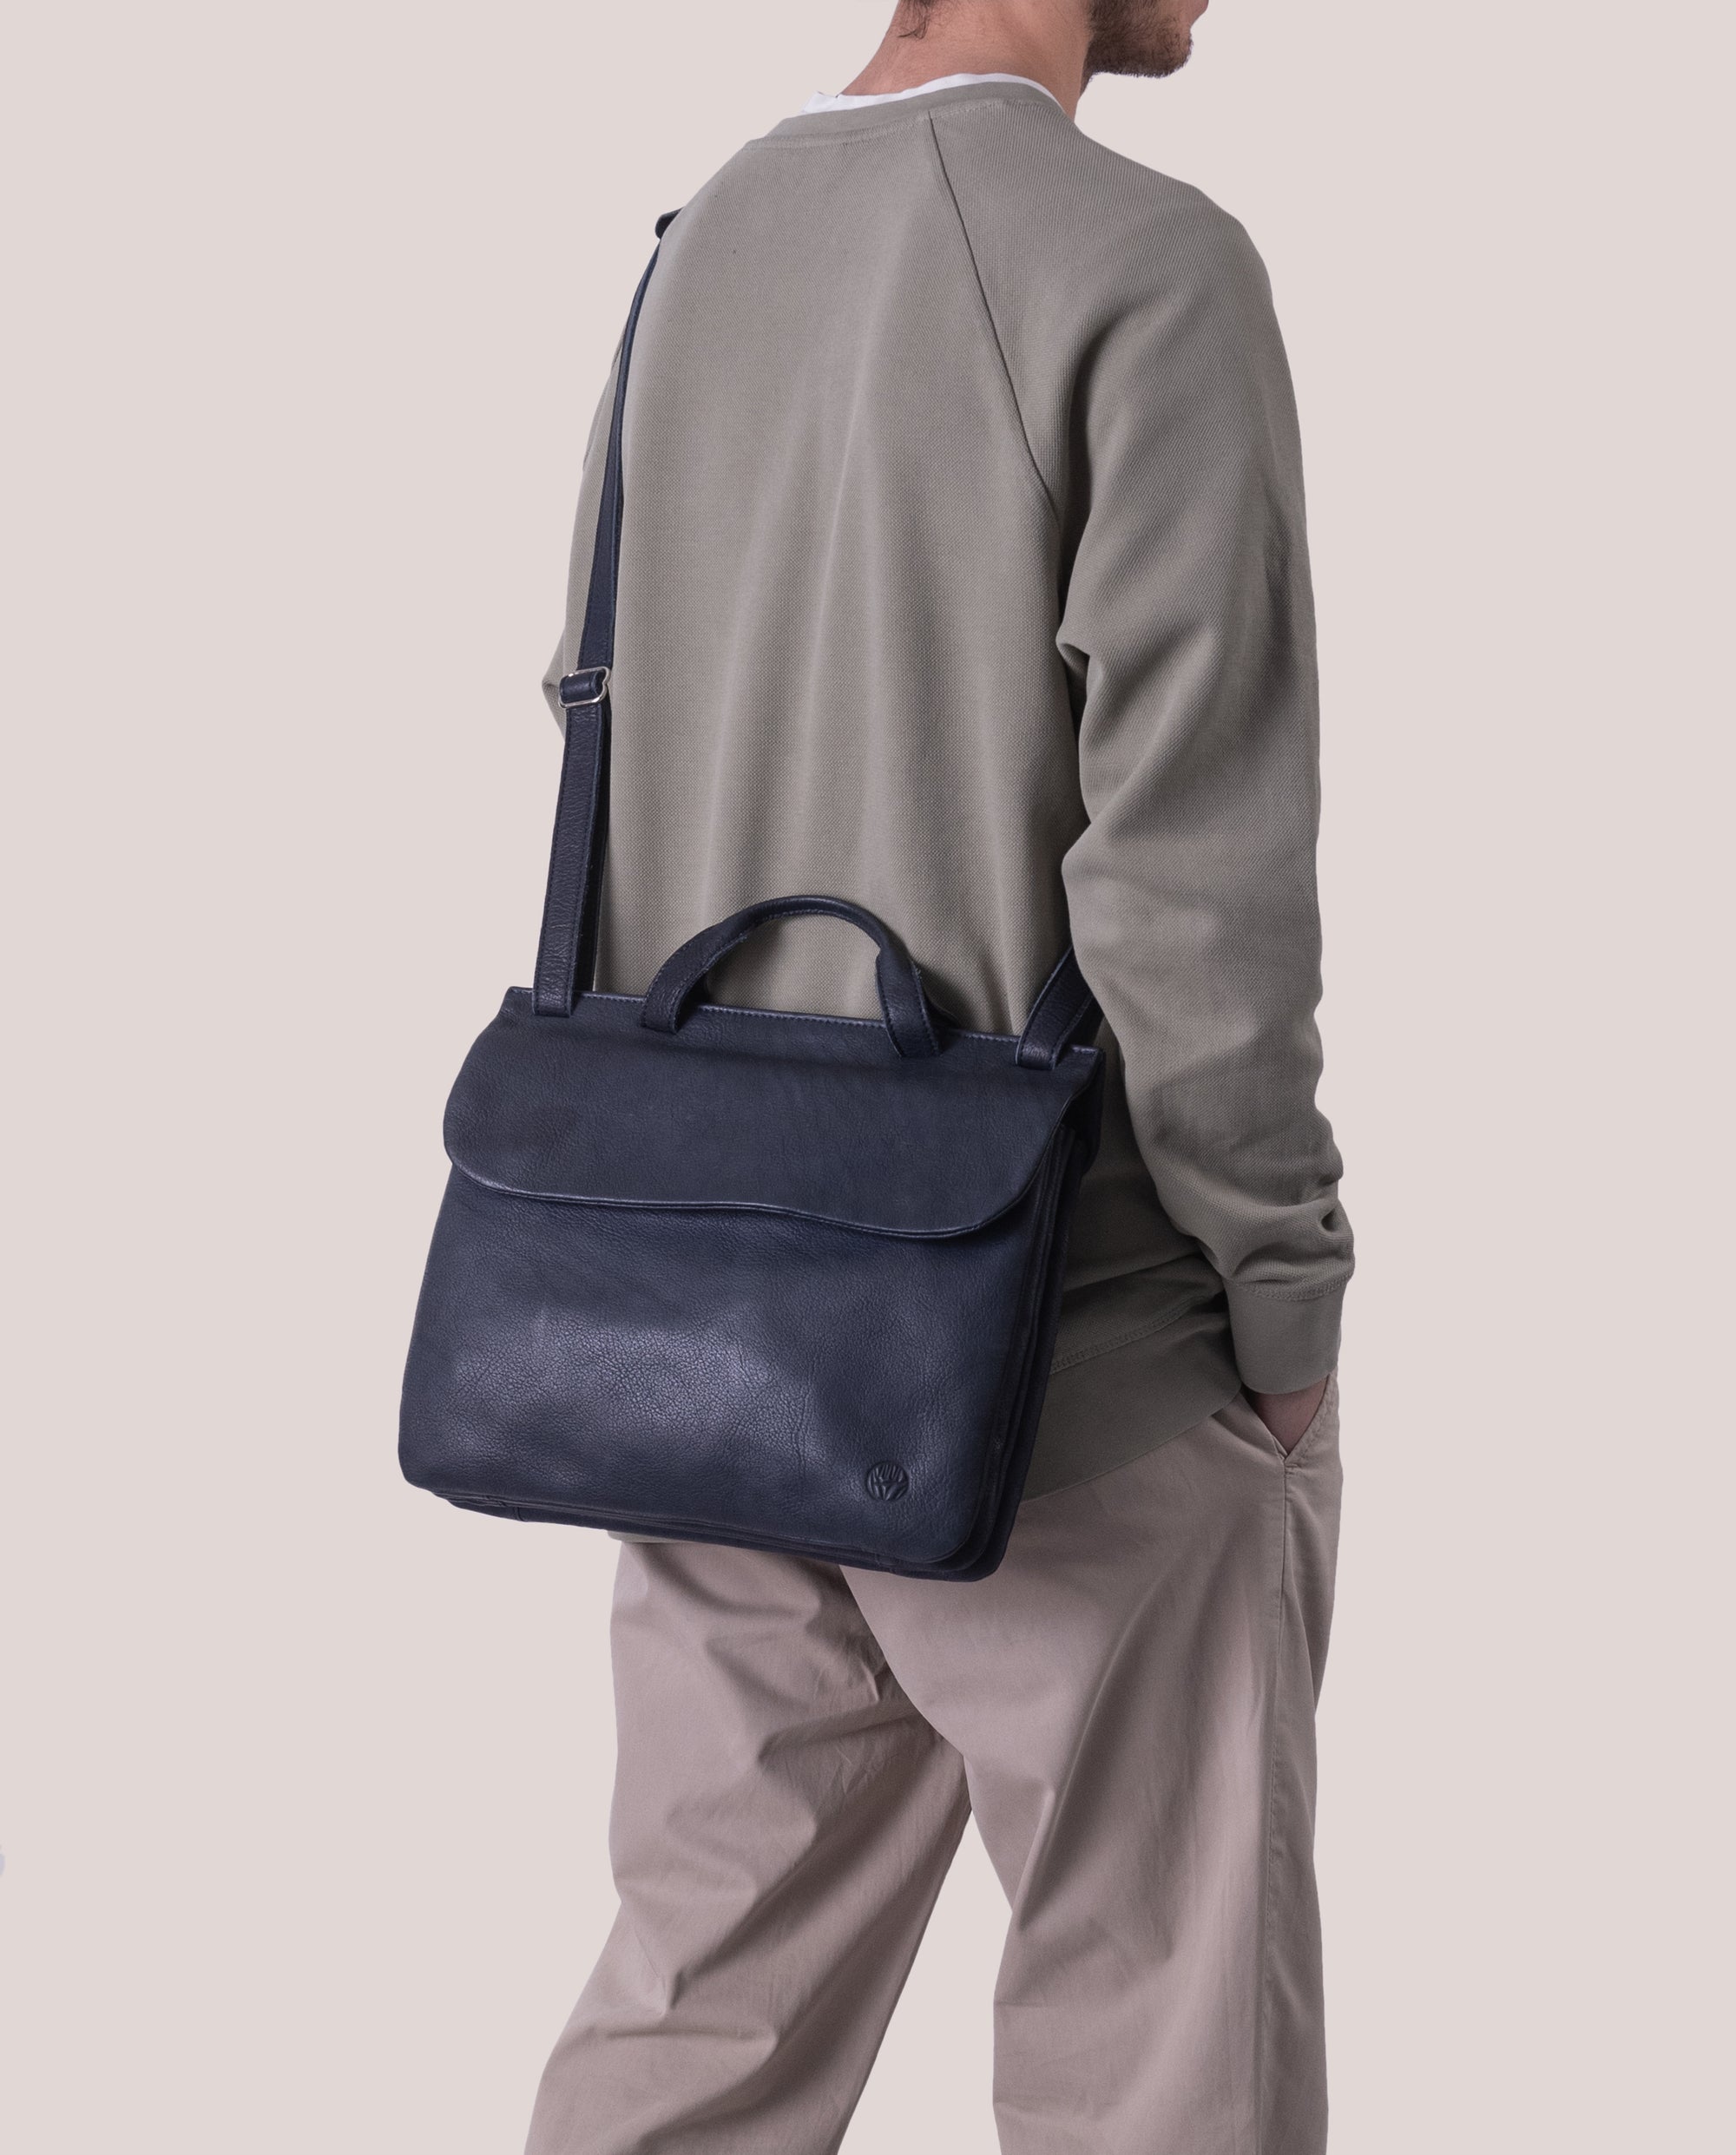 Chacoral smooth Businessbag